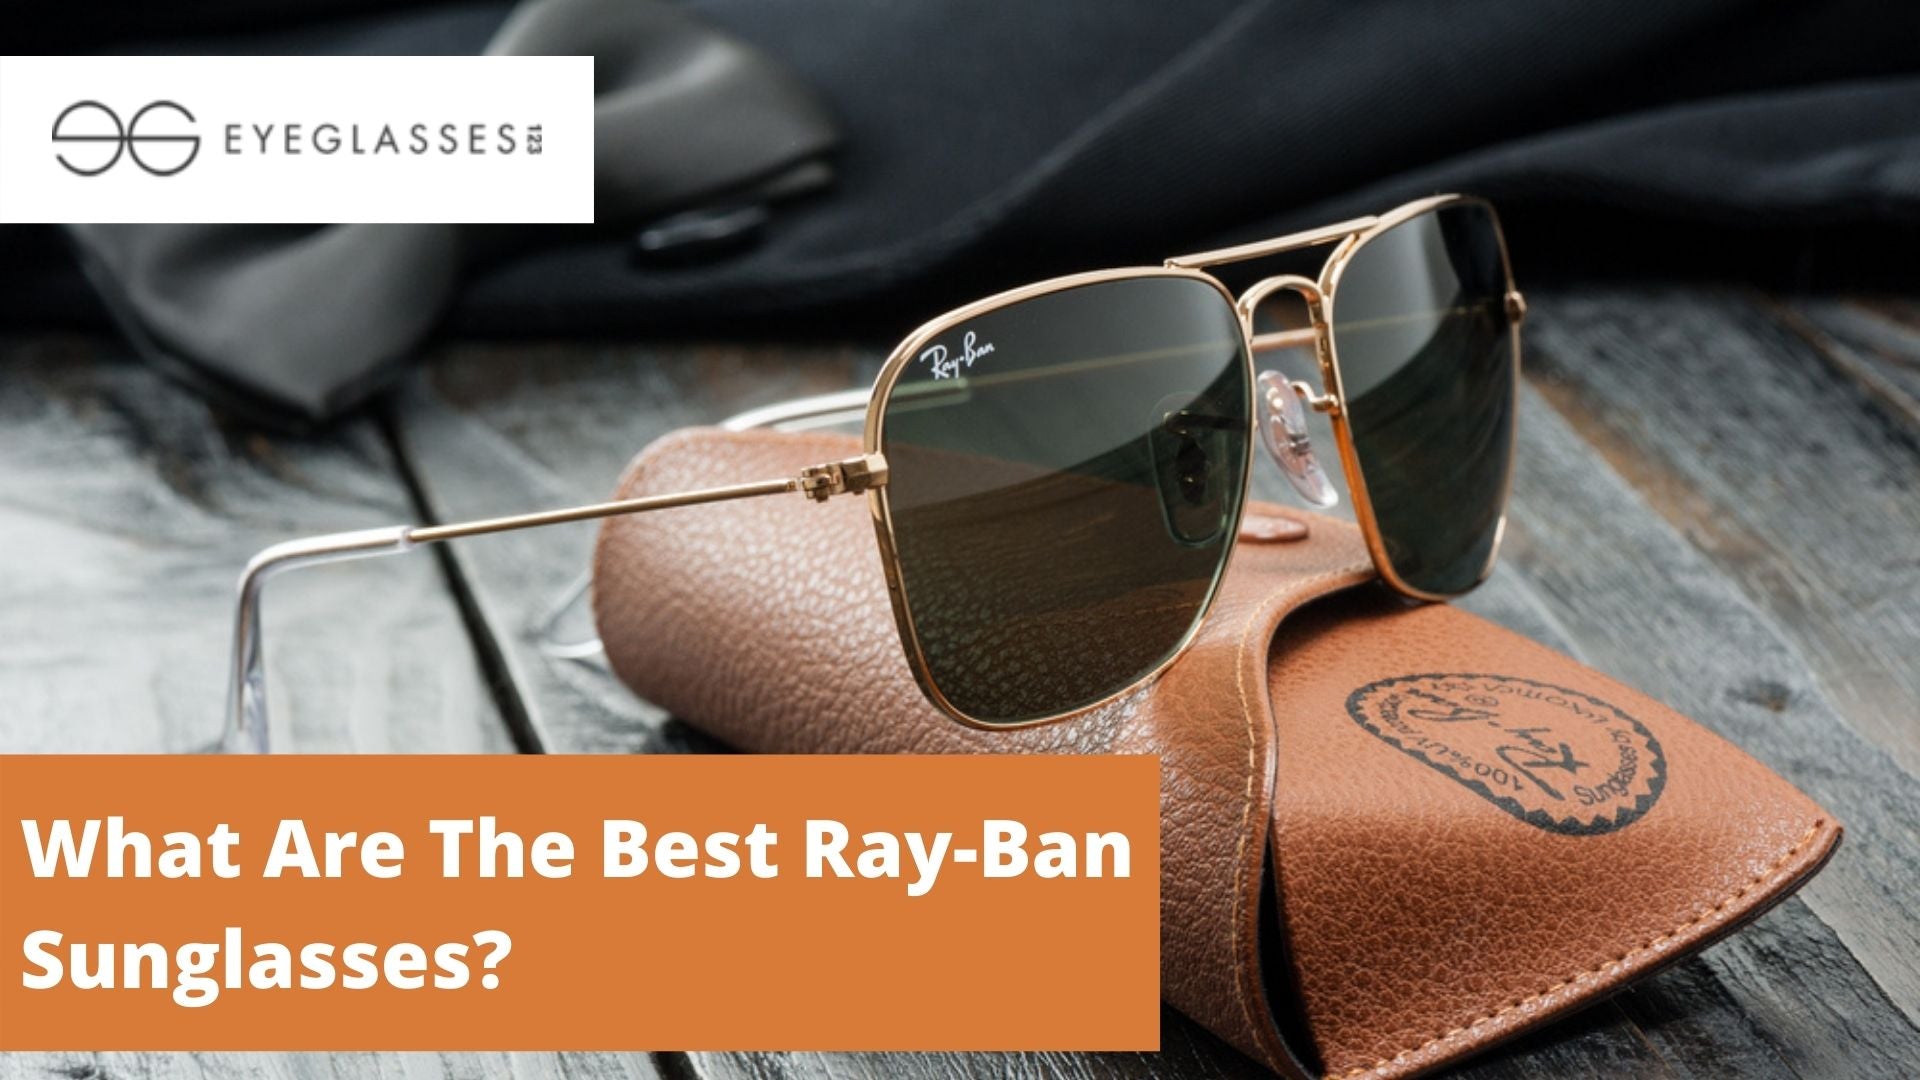 What Are The Best Ray-Ban Sunglasses